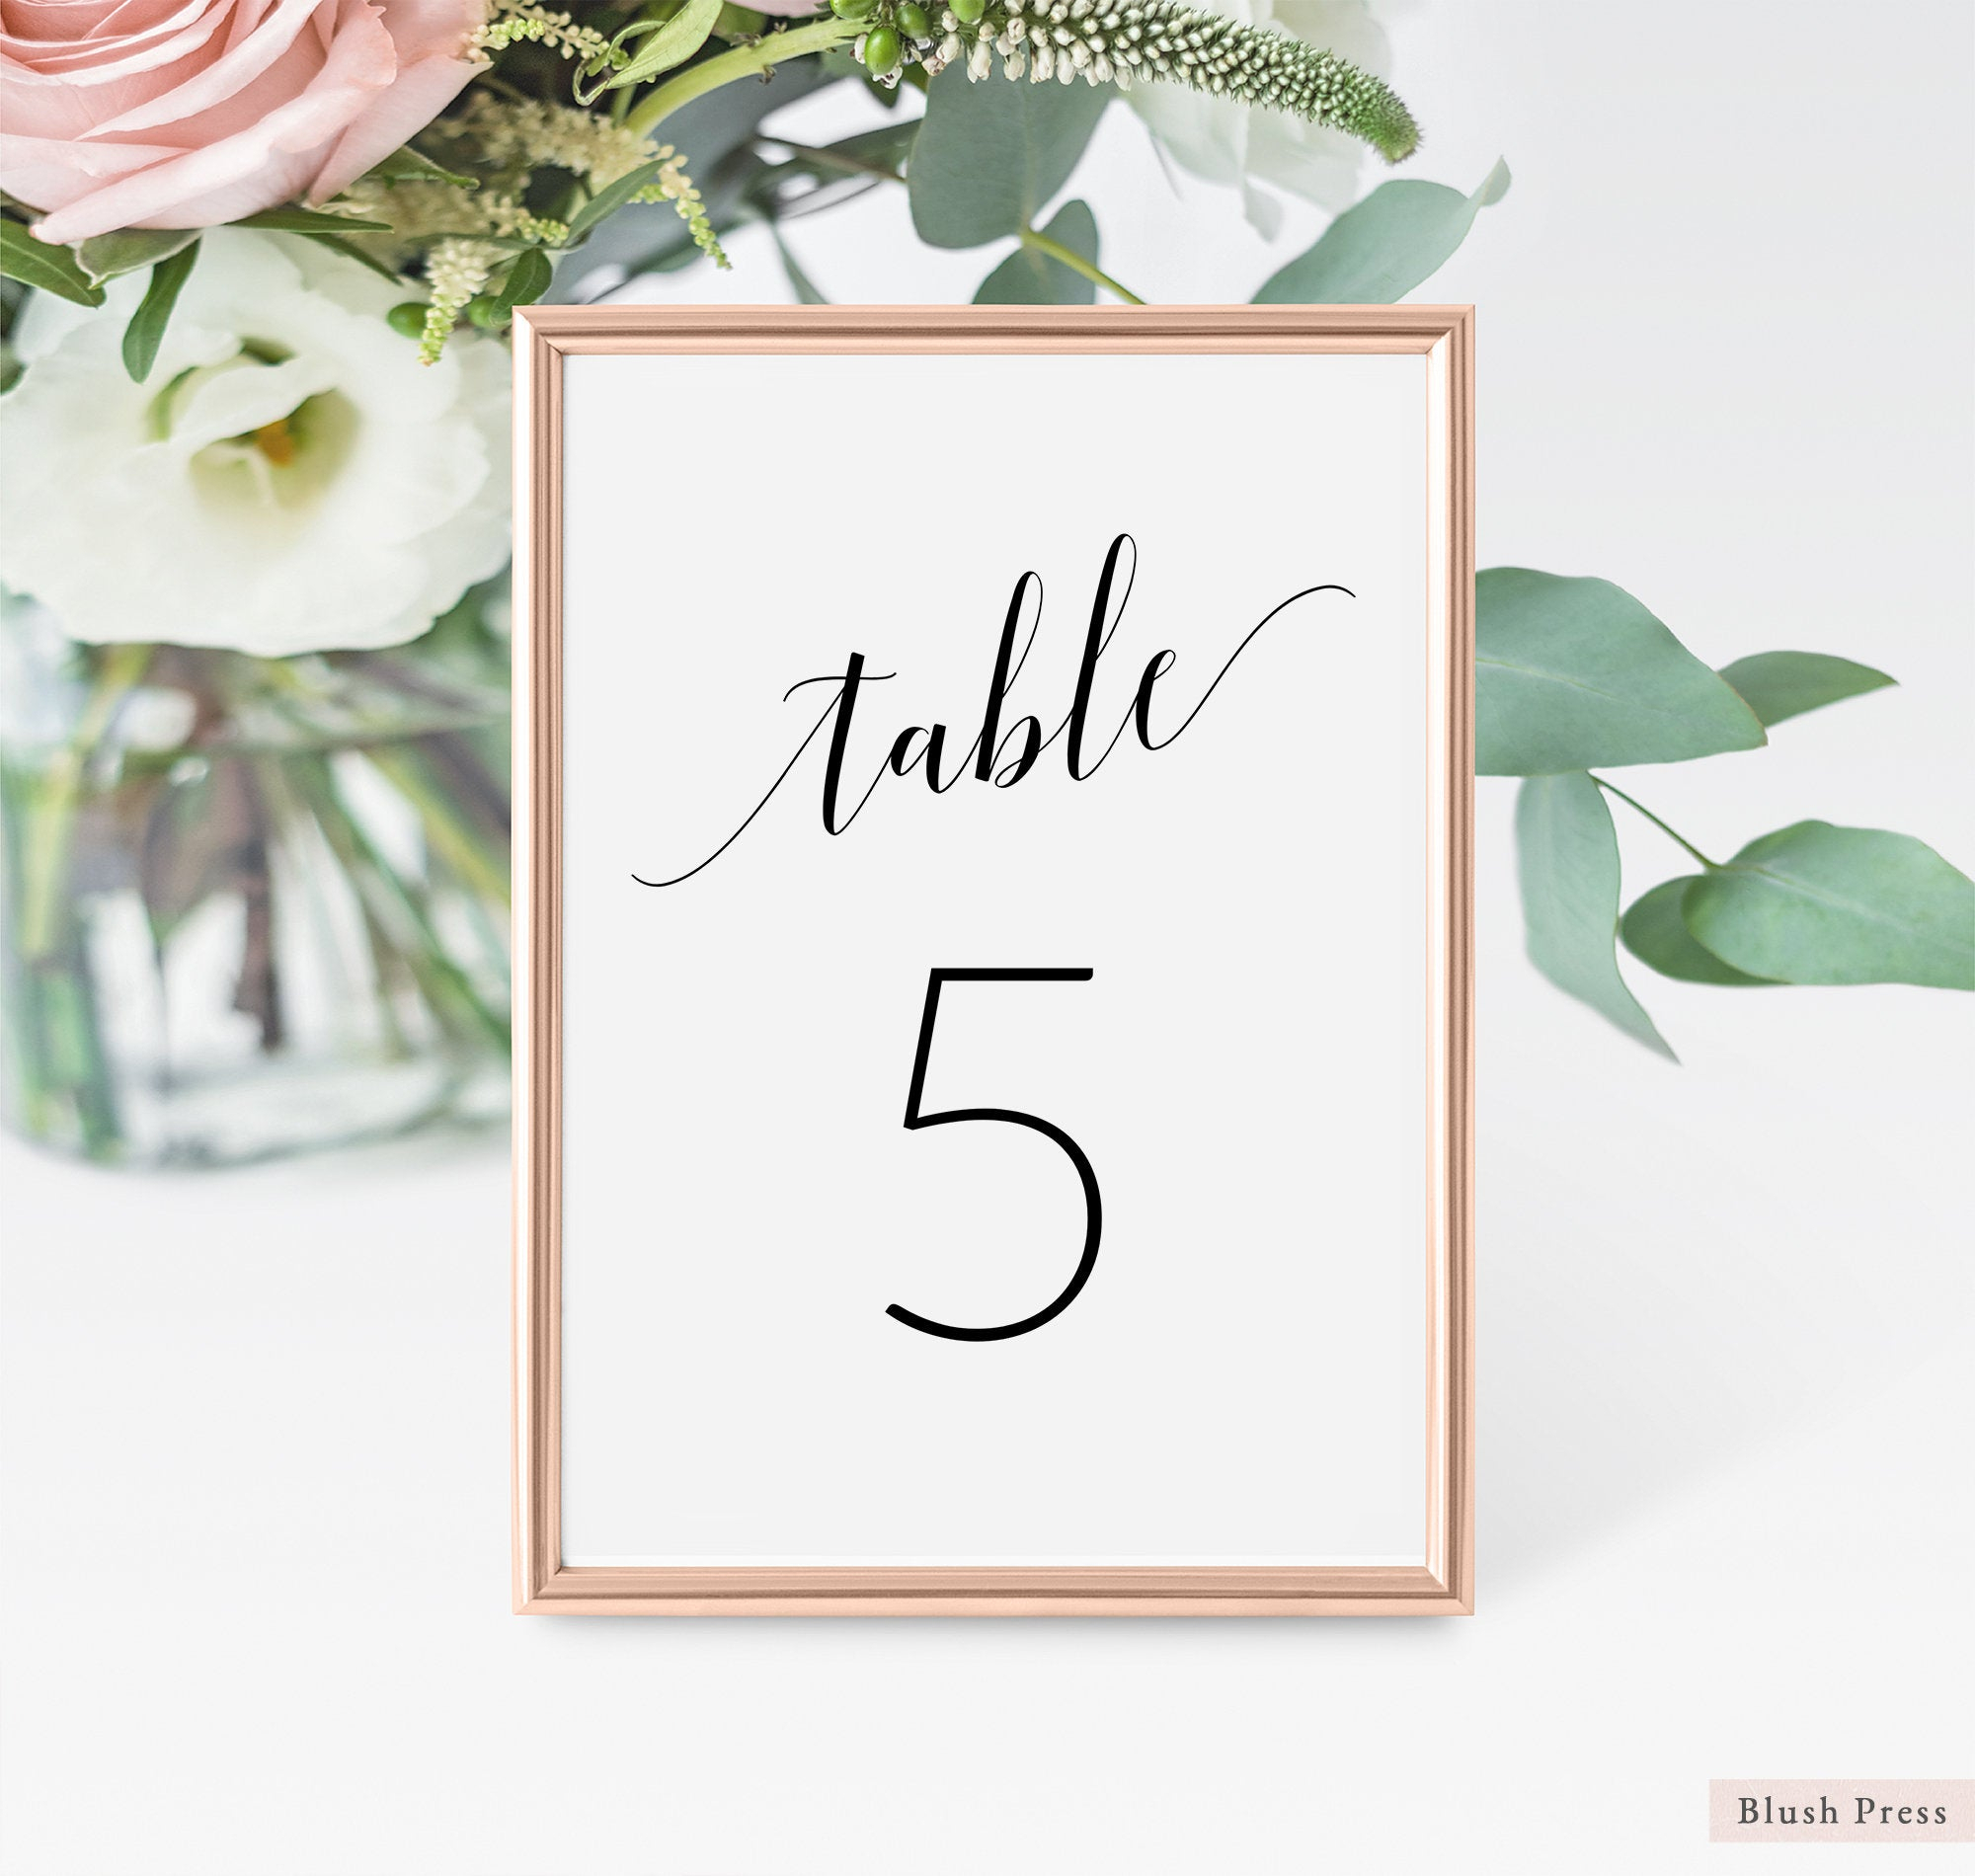 Wedding Table Number Cards Template, Printable Table Numbers Wedding, Table  Seating Card, Table Numbers Printable, Table Card Number Sav 062 Intended For Table Number Cards Template